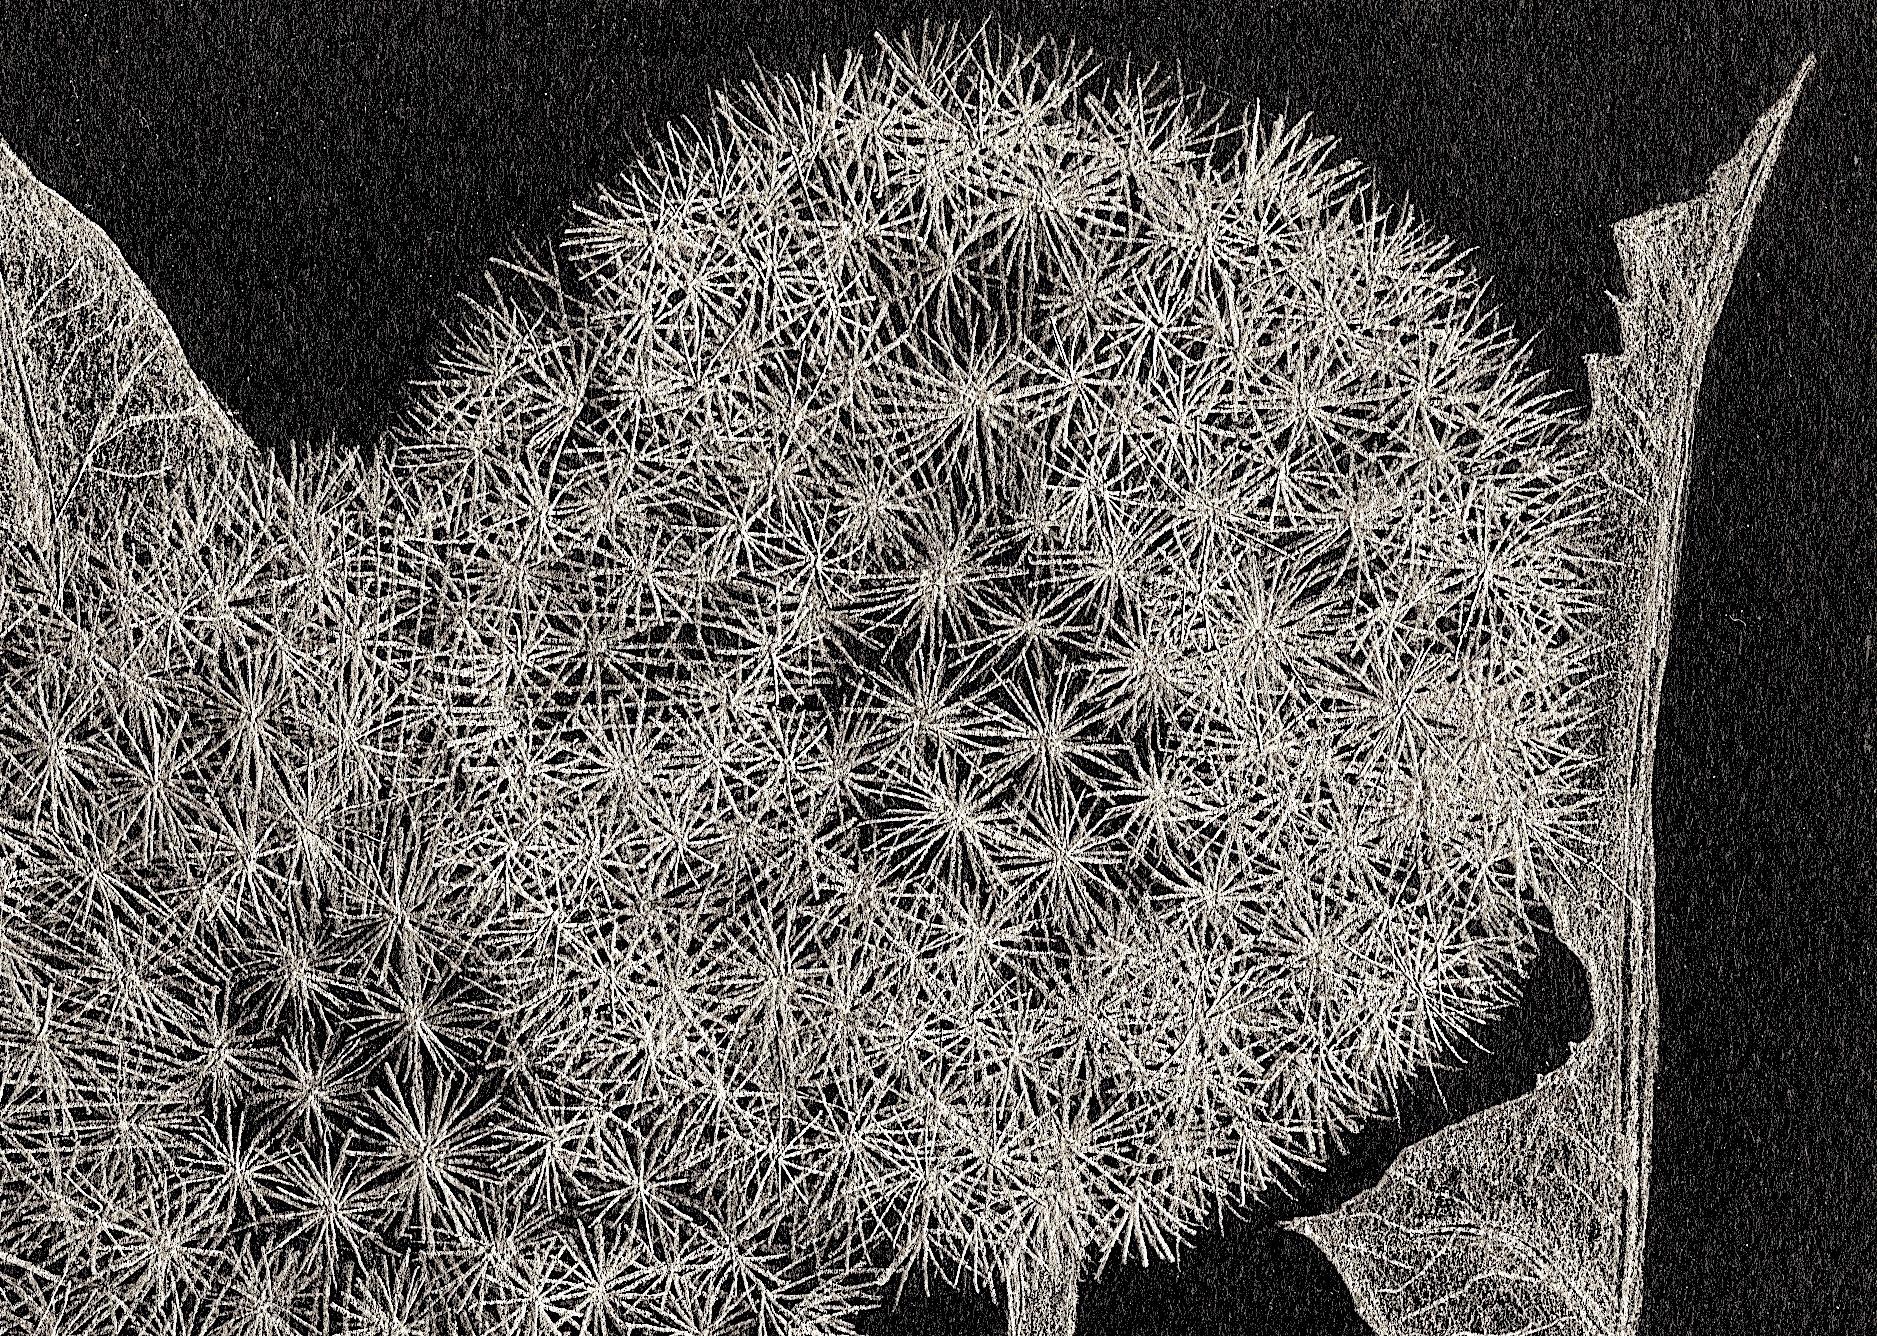 Margot Glass captures the lace-like delicacy of her subject in her graphite realist drawing on paper, 